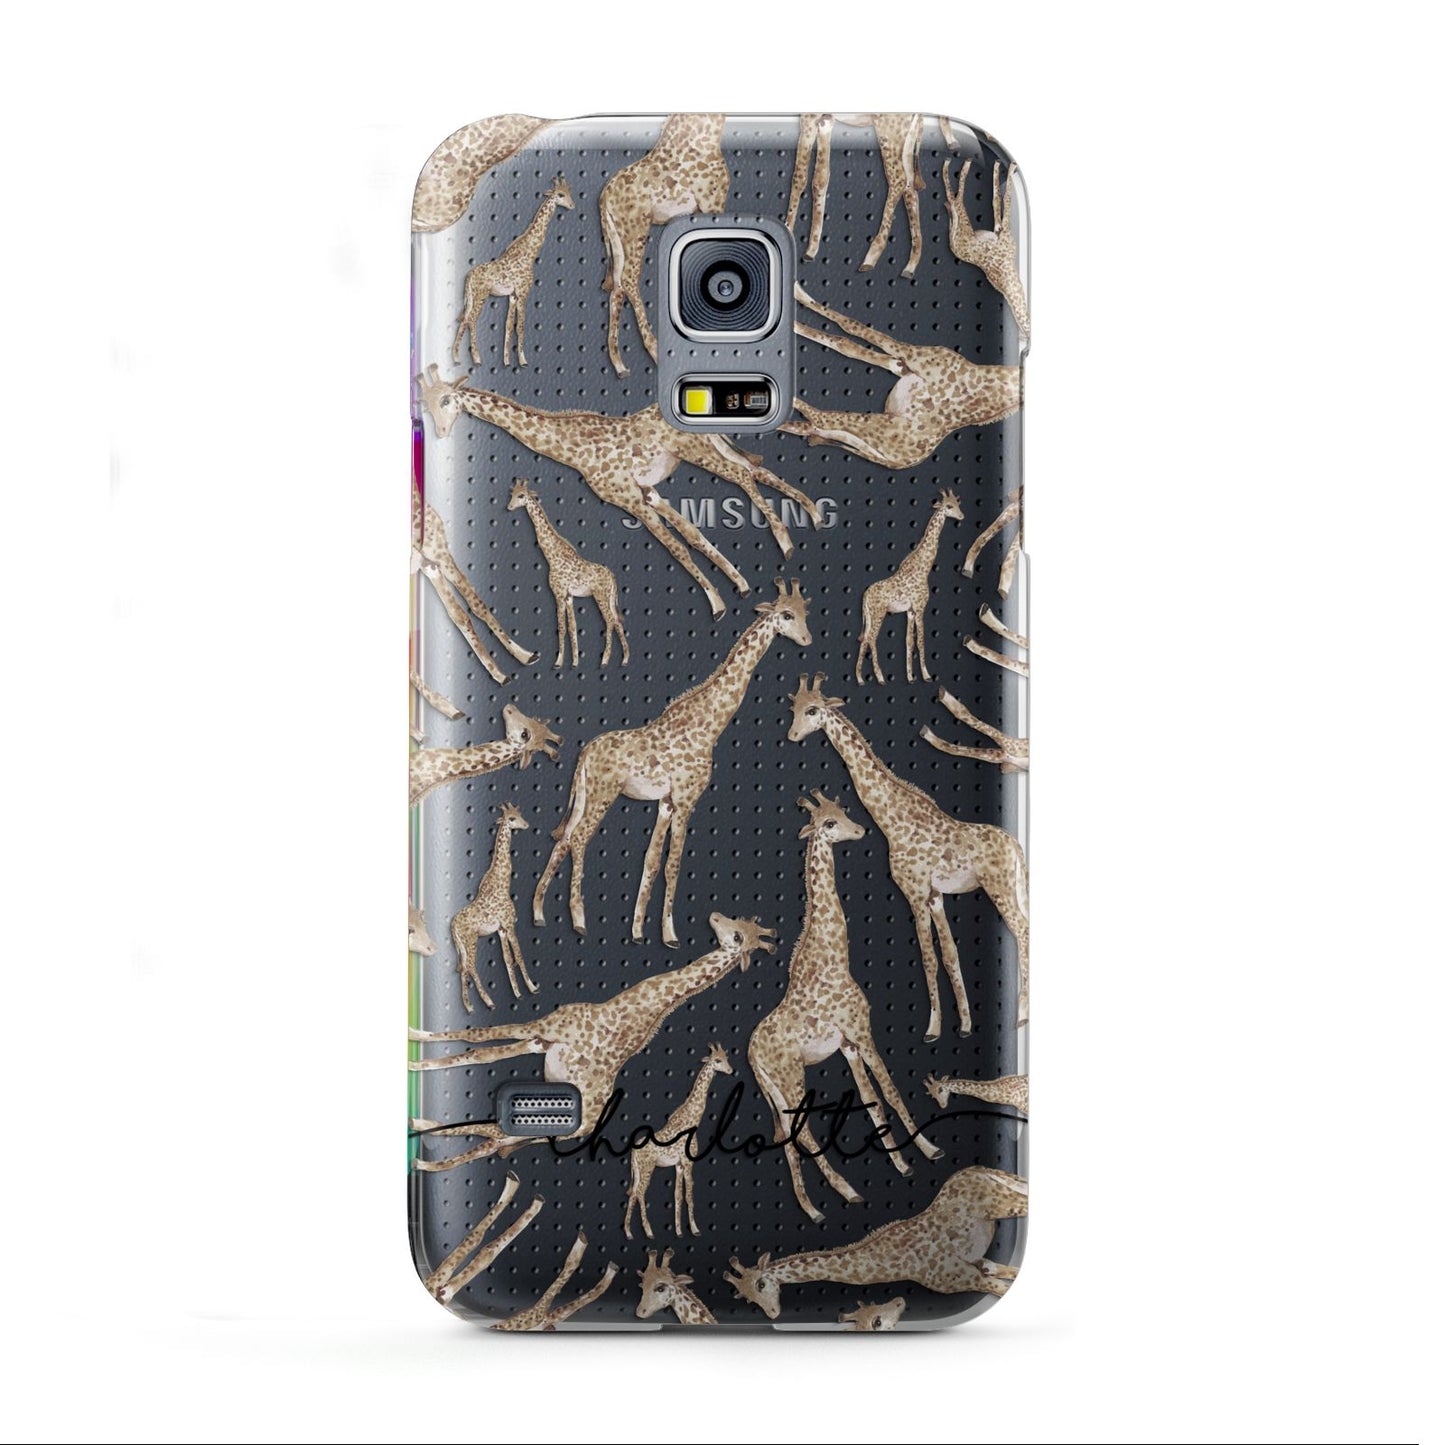 Personalised Giraffes with Name Samsung Galaxy S5 Mini Case